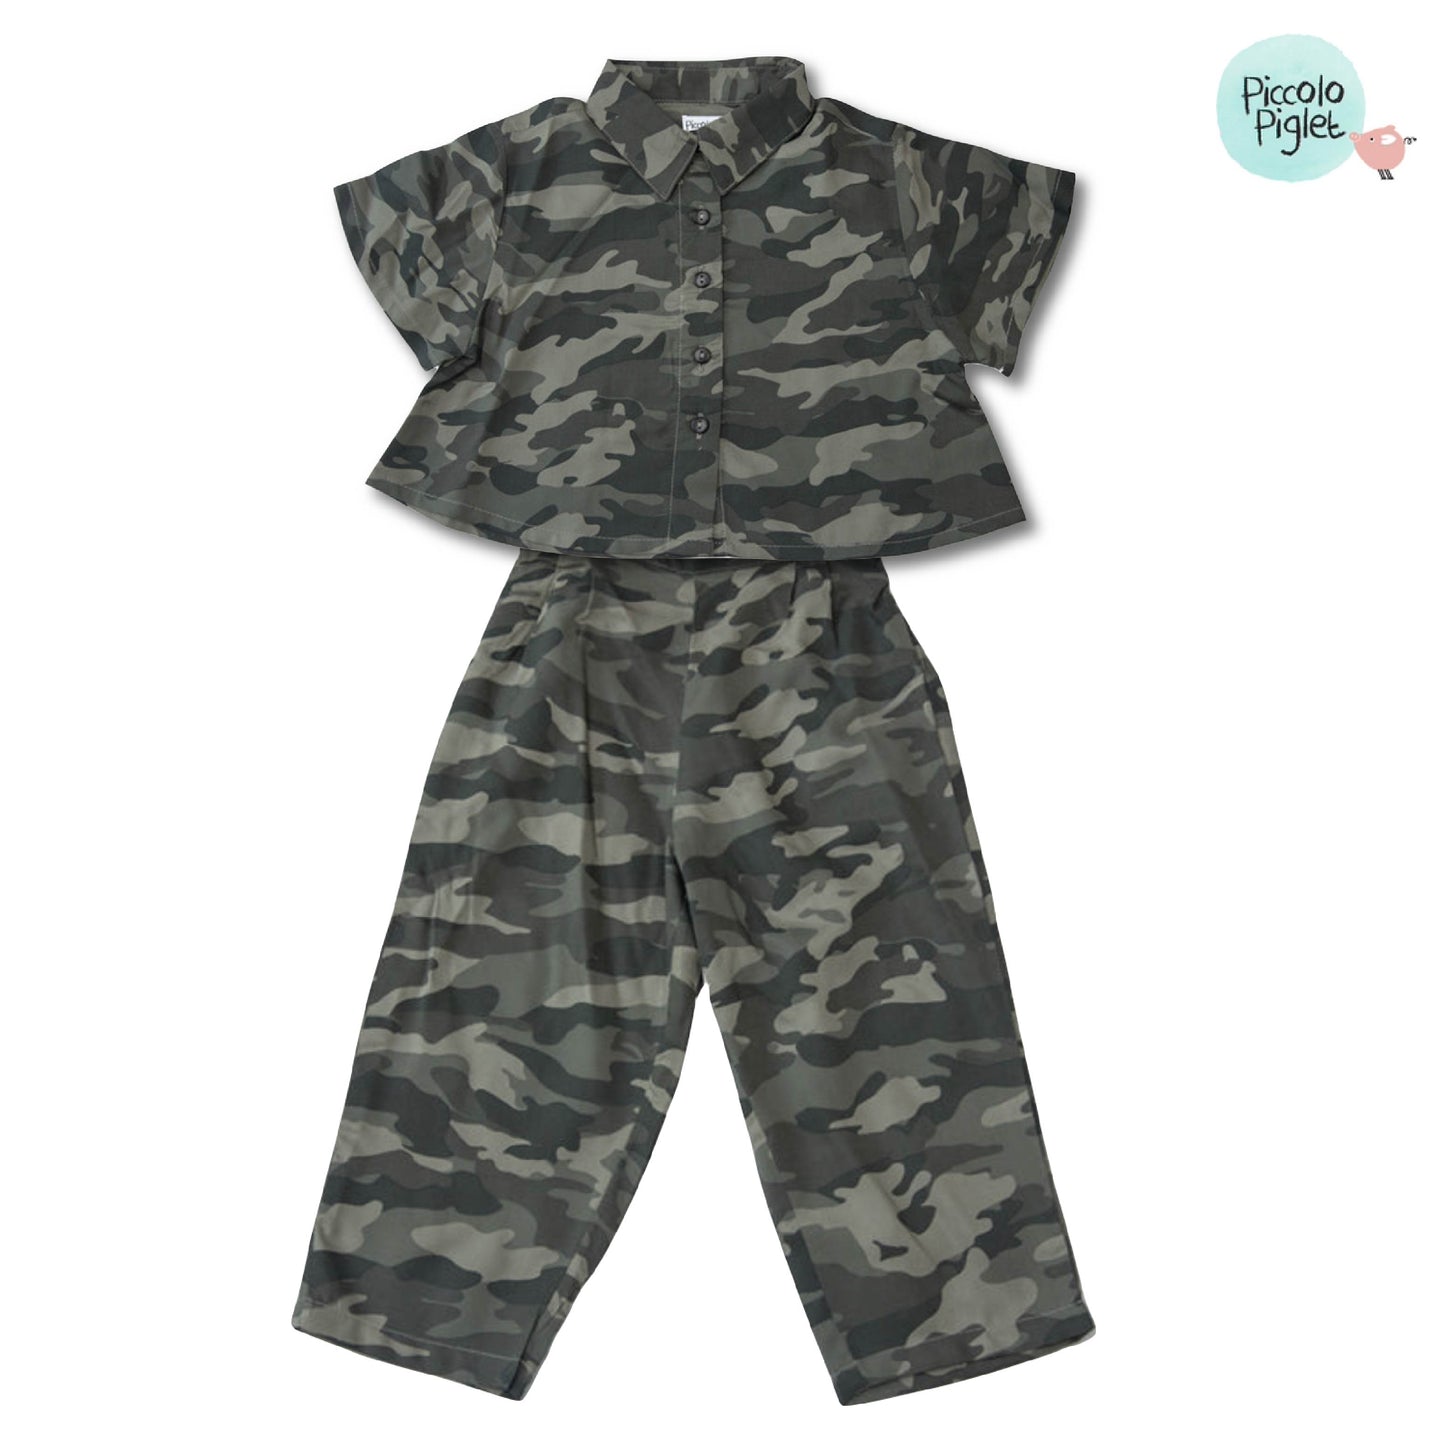 Balloon pants and crop top set Camouflage